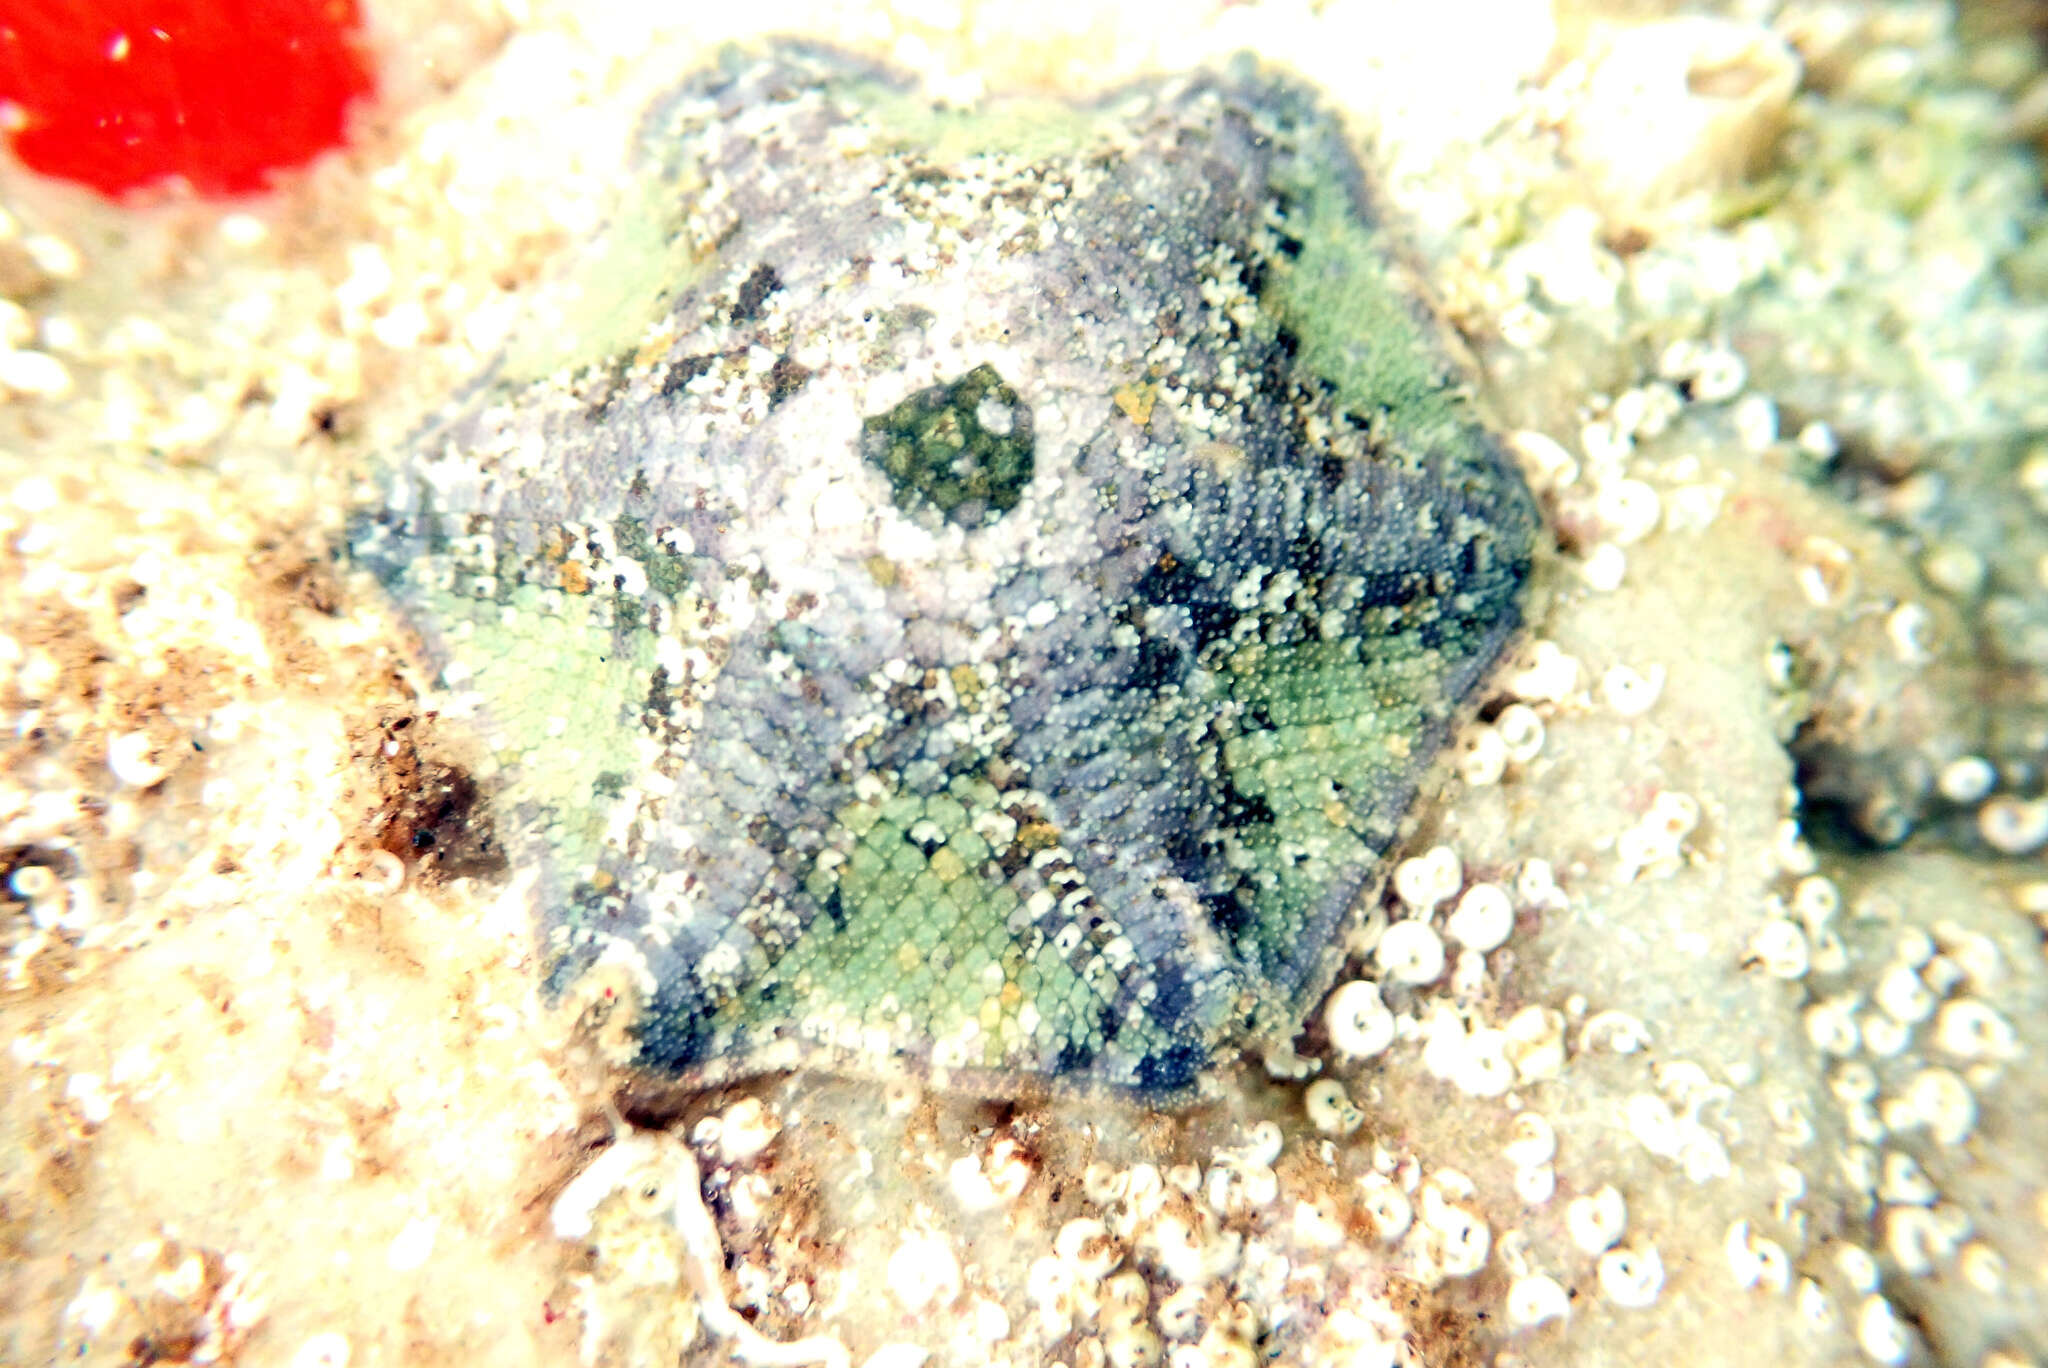 Image of Meridiastra occidens (O'Loughlin, Waters & Roy 2003)